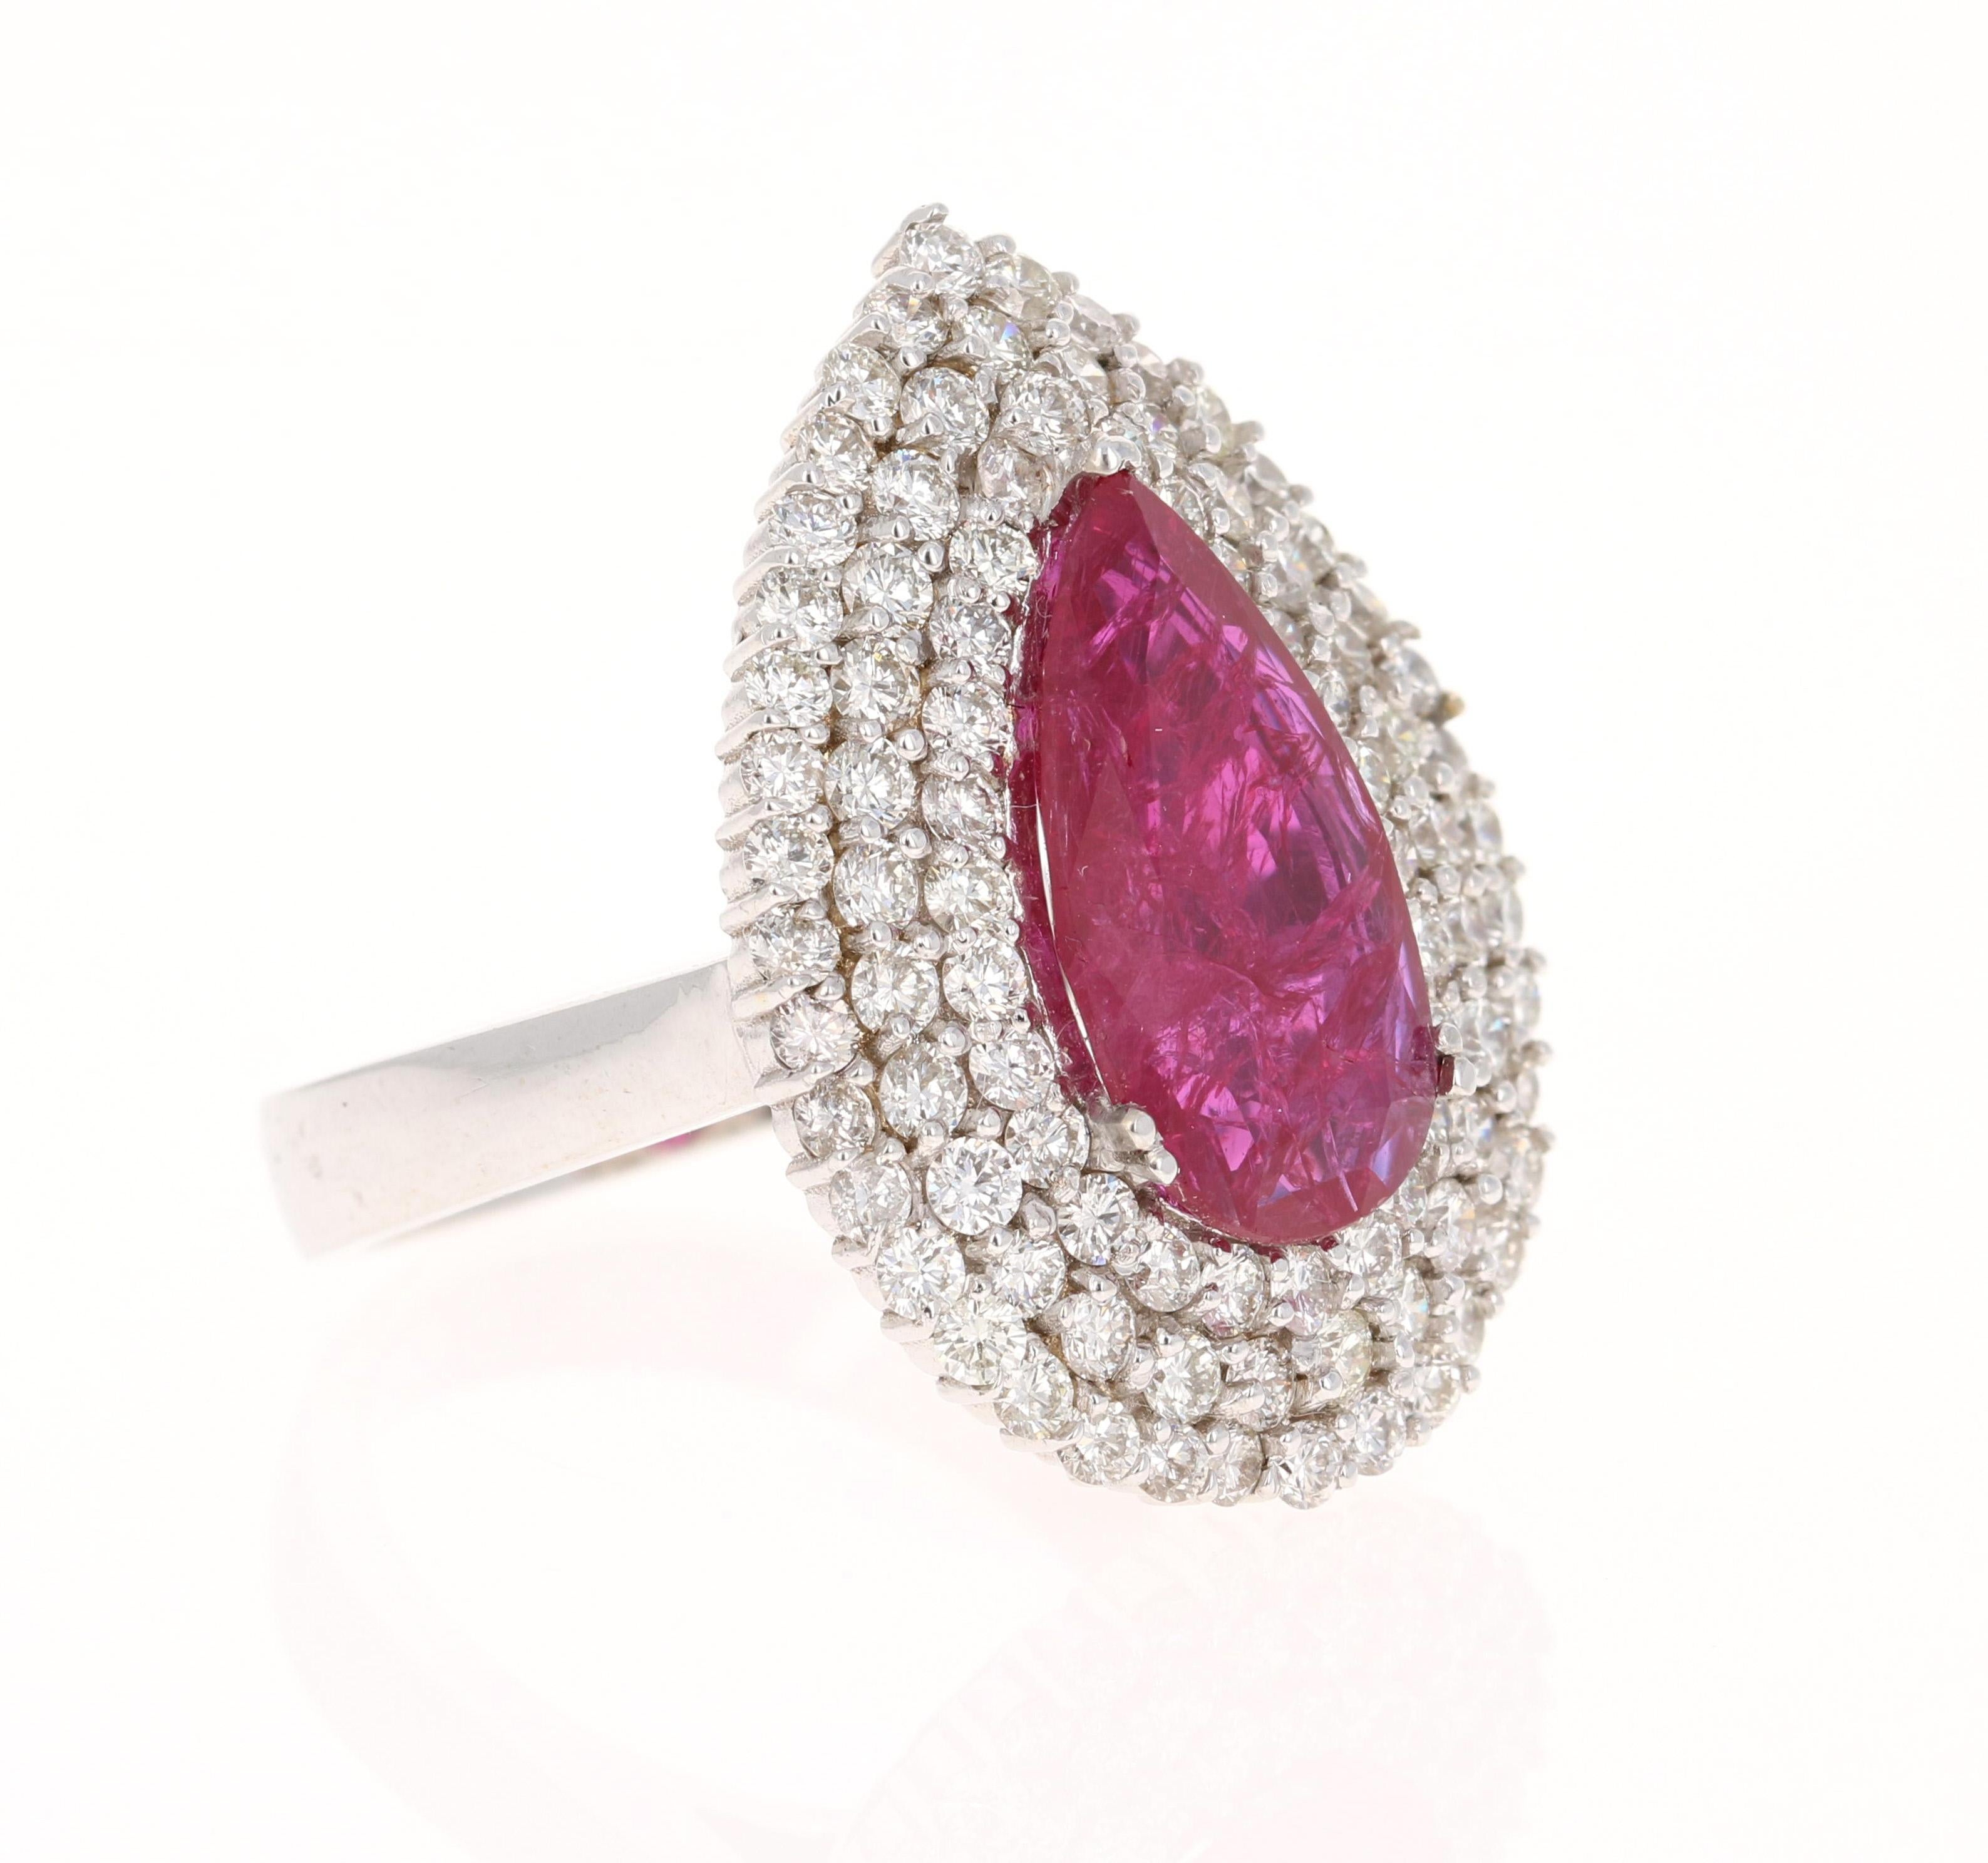 This ring has a Natural Pear Cut GIA Certified Ruby that weighs 3.90 carats. It is surrounded by 92 Round Cut Natural Diamonds that weigh 2.33 carats. The total carat weight of the ring is 6.23 carats. The clarity and color of the diamonds are VS-H.